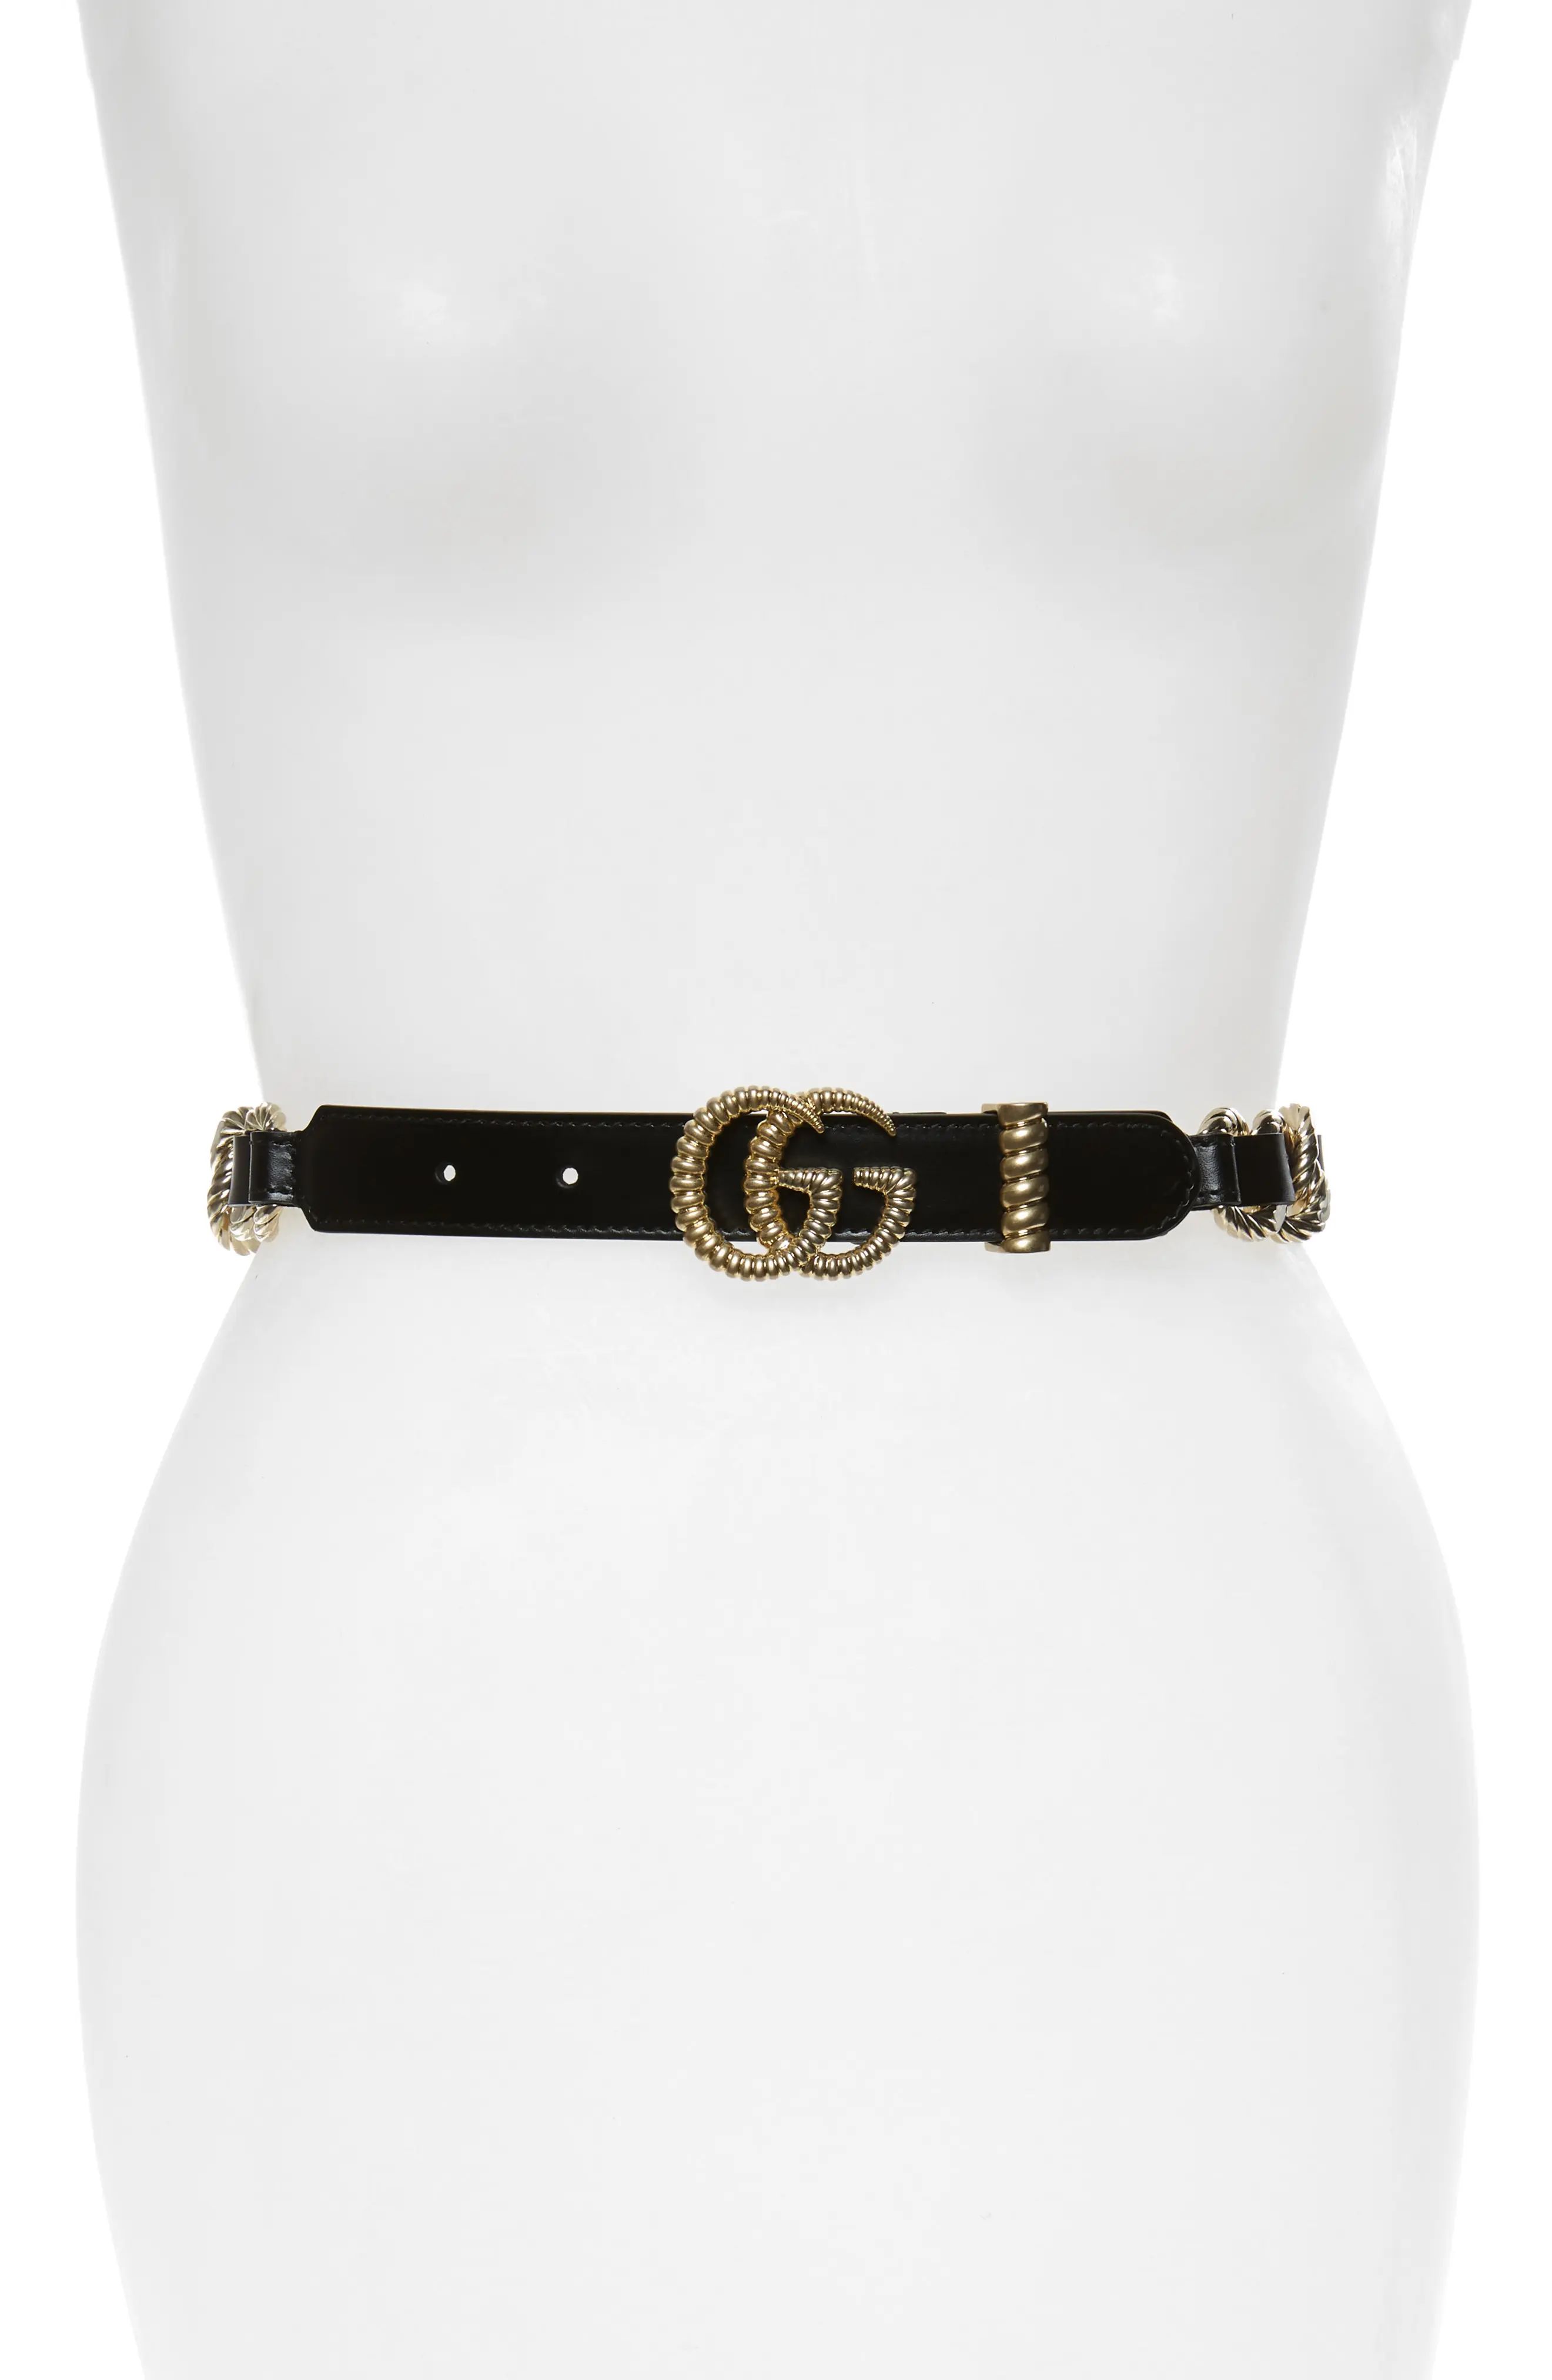 Women's Gucci Textured Gg Chain & Leather Skinny Belt, Size 90 - Nero | Nordstrom